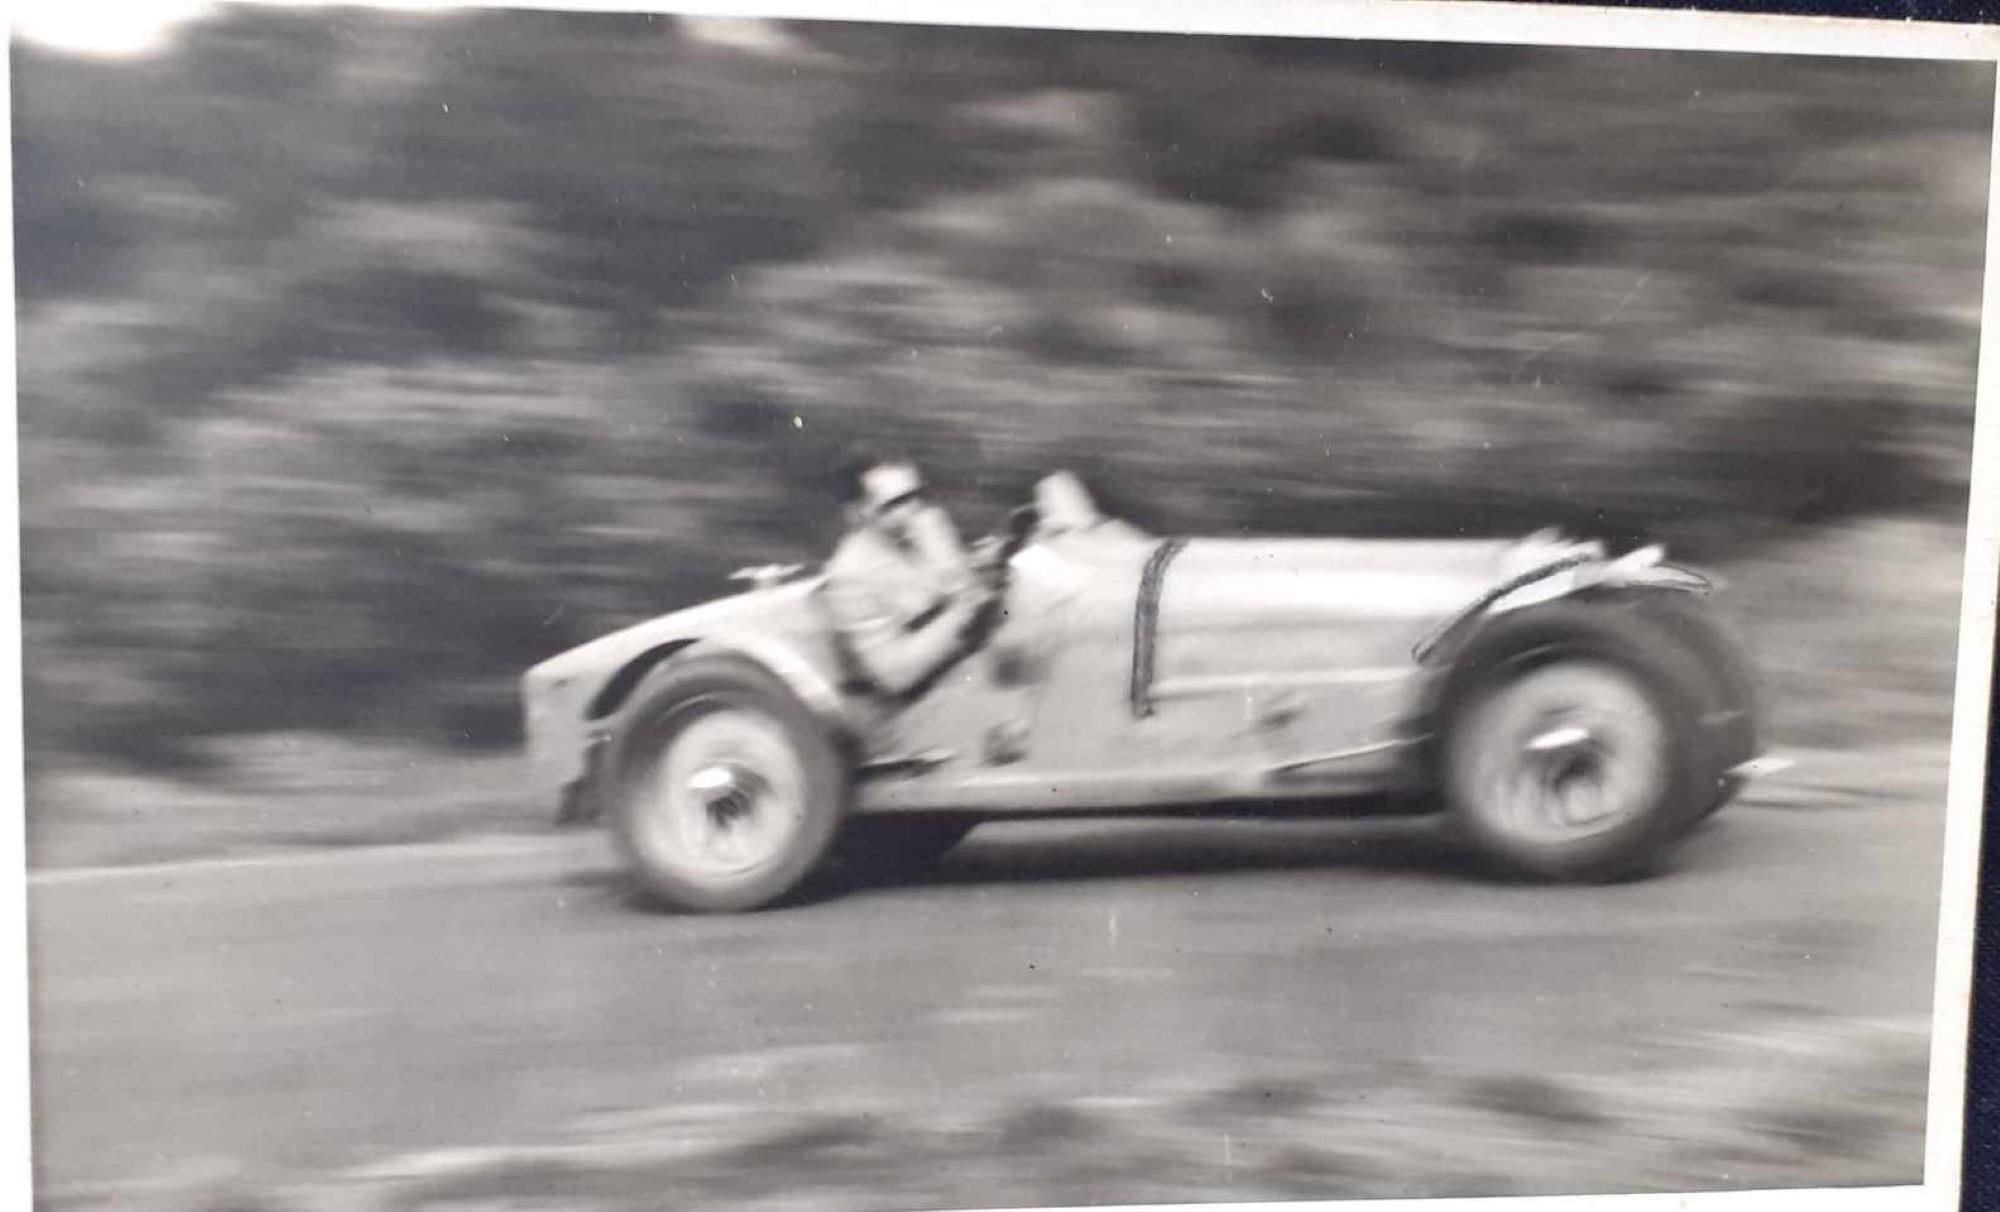 Name:  NSCC 1950 #0116 Bugatti T35 at speed - light colour 1950's - image Graeme Wells arch Anthony Wel.jpg
Views: 161
Size:  158.1 KB